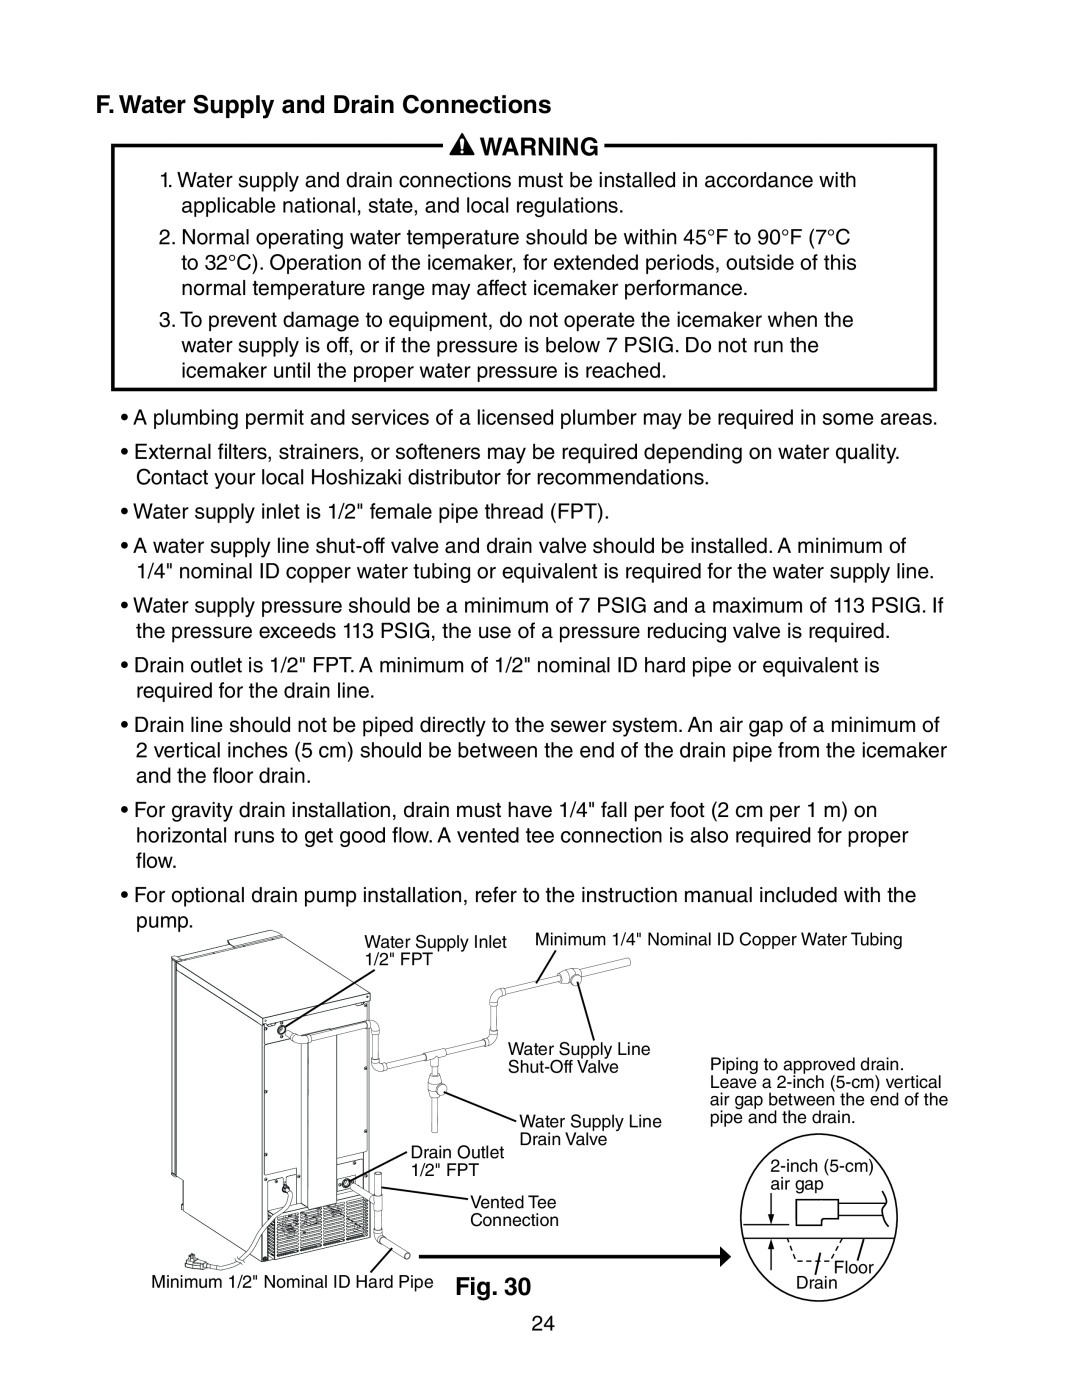 Hoshizaki C-100BAF-DS instruction manual F. Water Supply and Drain Connections 